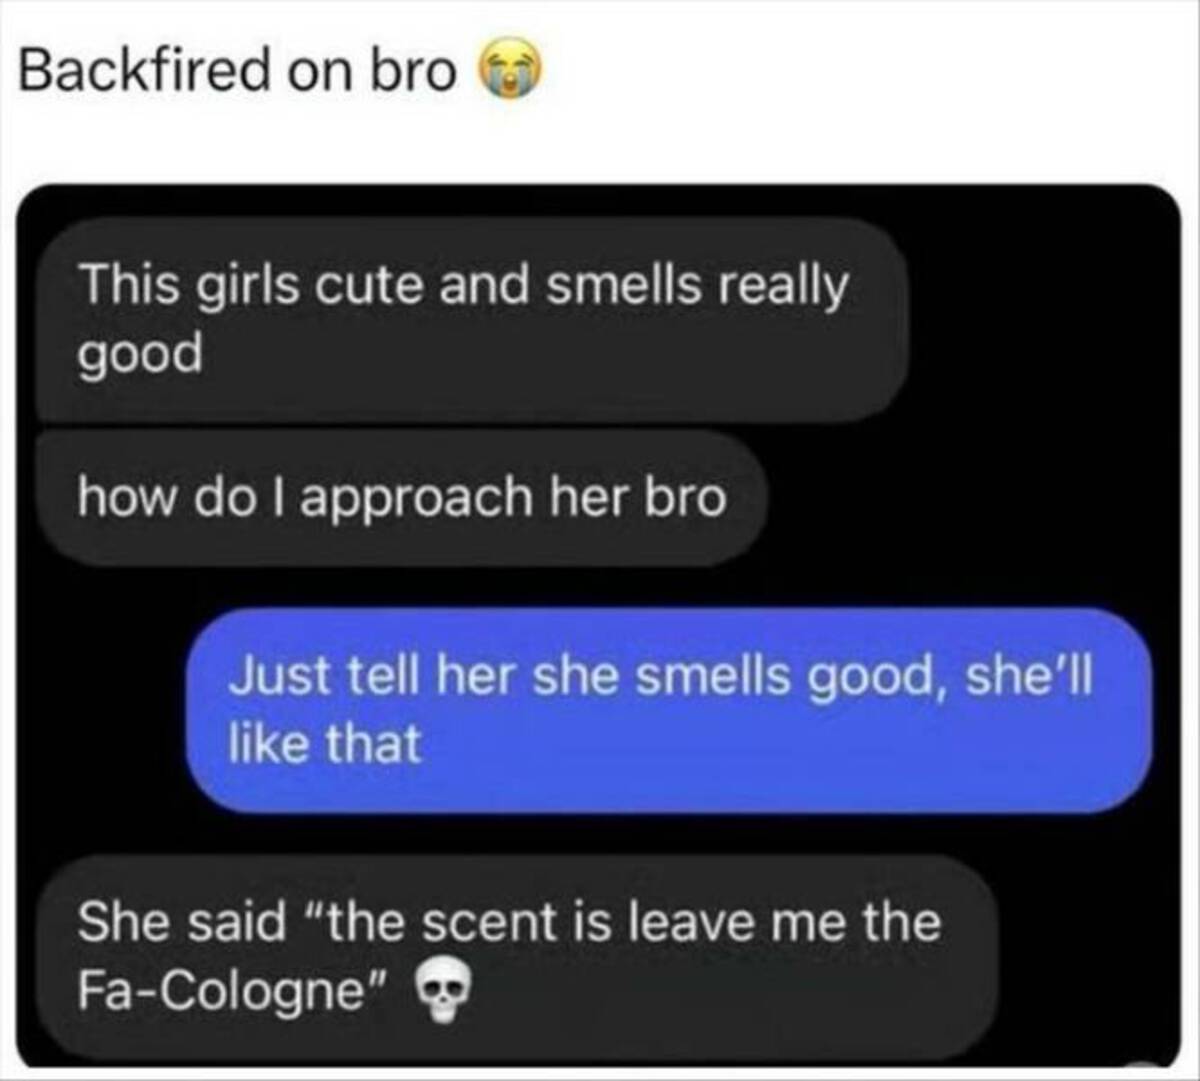 Funny meme - Backfired on bro This girls cute and smells really good how do I approach her bro Just tell her she smells good, she'll that She said "the scent is leave me the FaCologne"